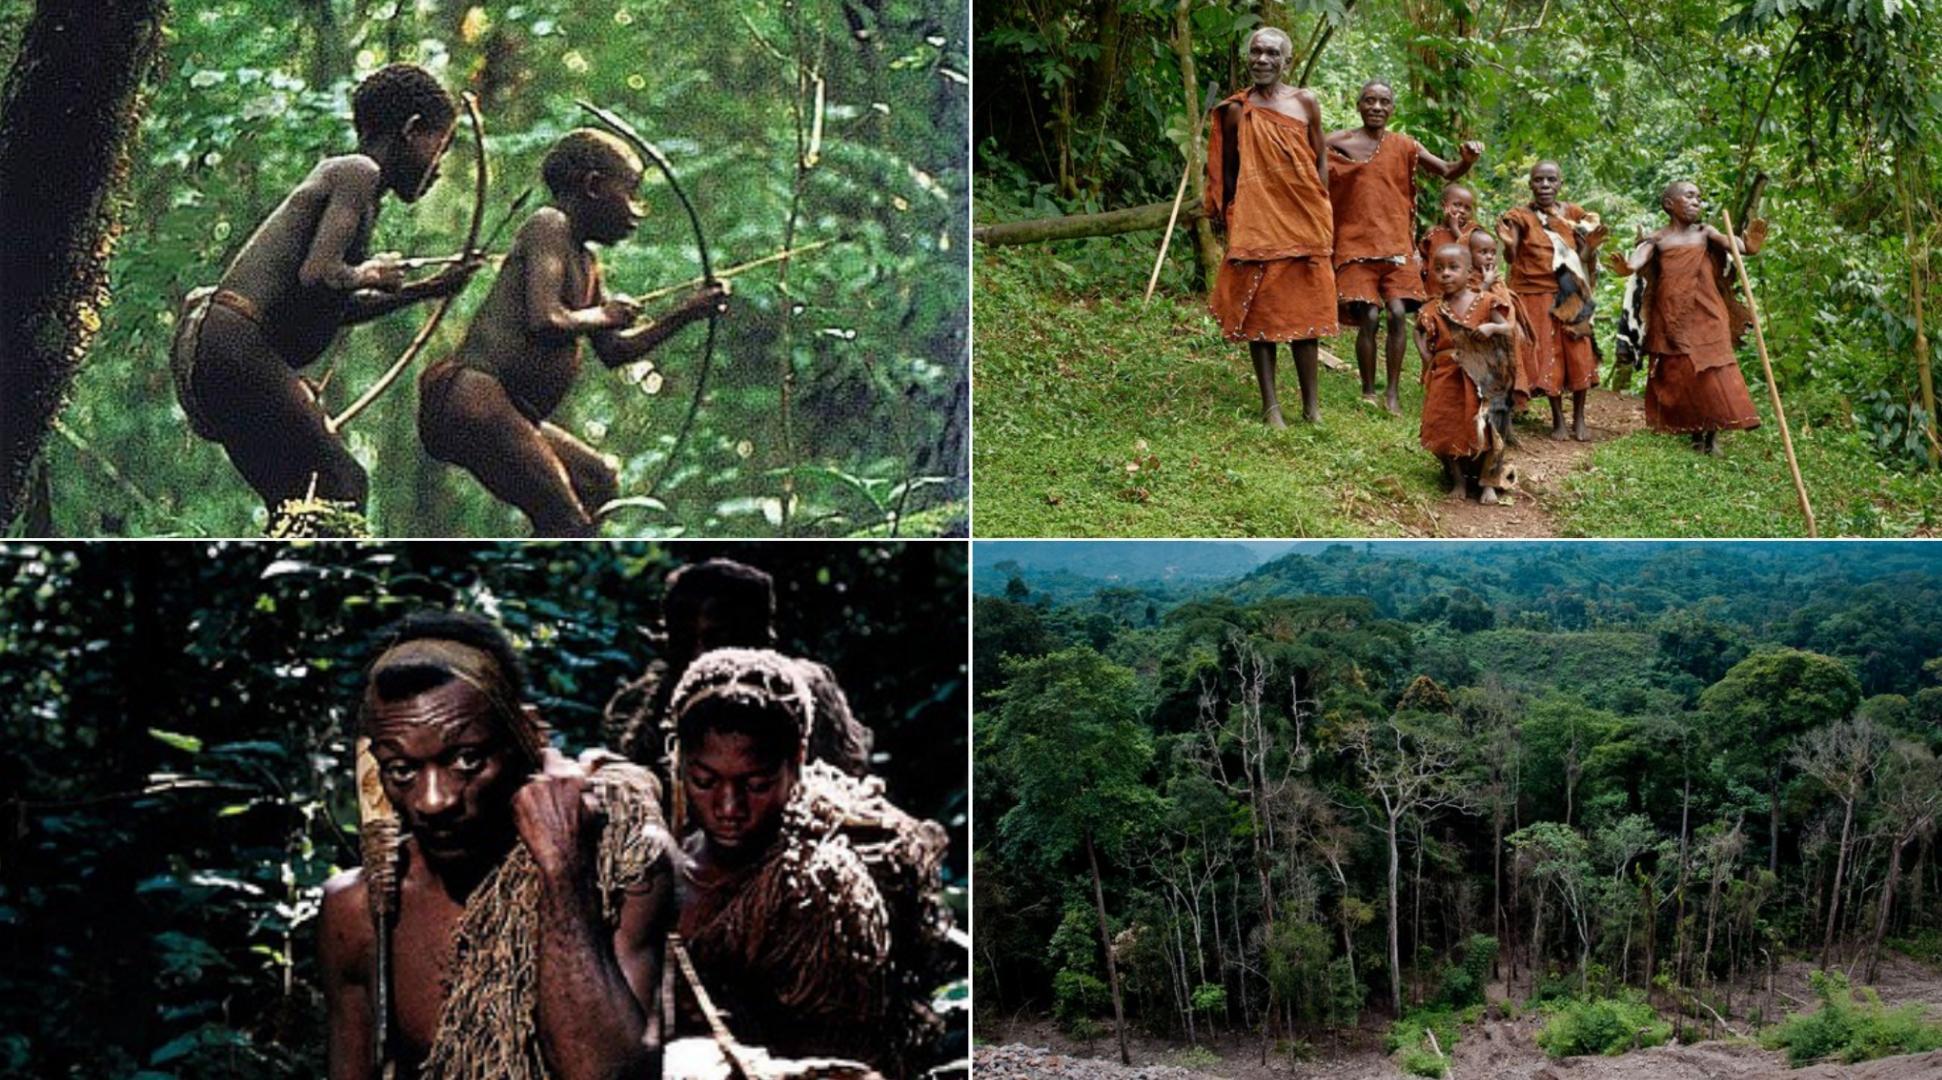 Meet Mbuti tribe, shortest people in Africa. They call Forest “Mother”, it provide all their needs